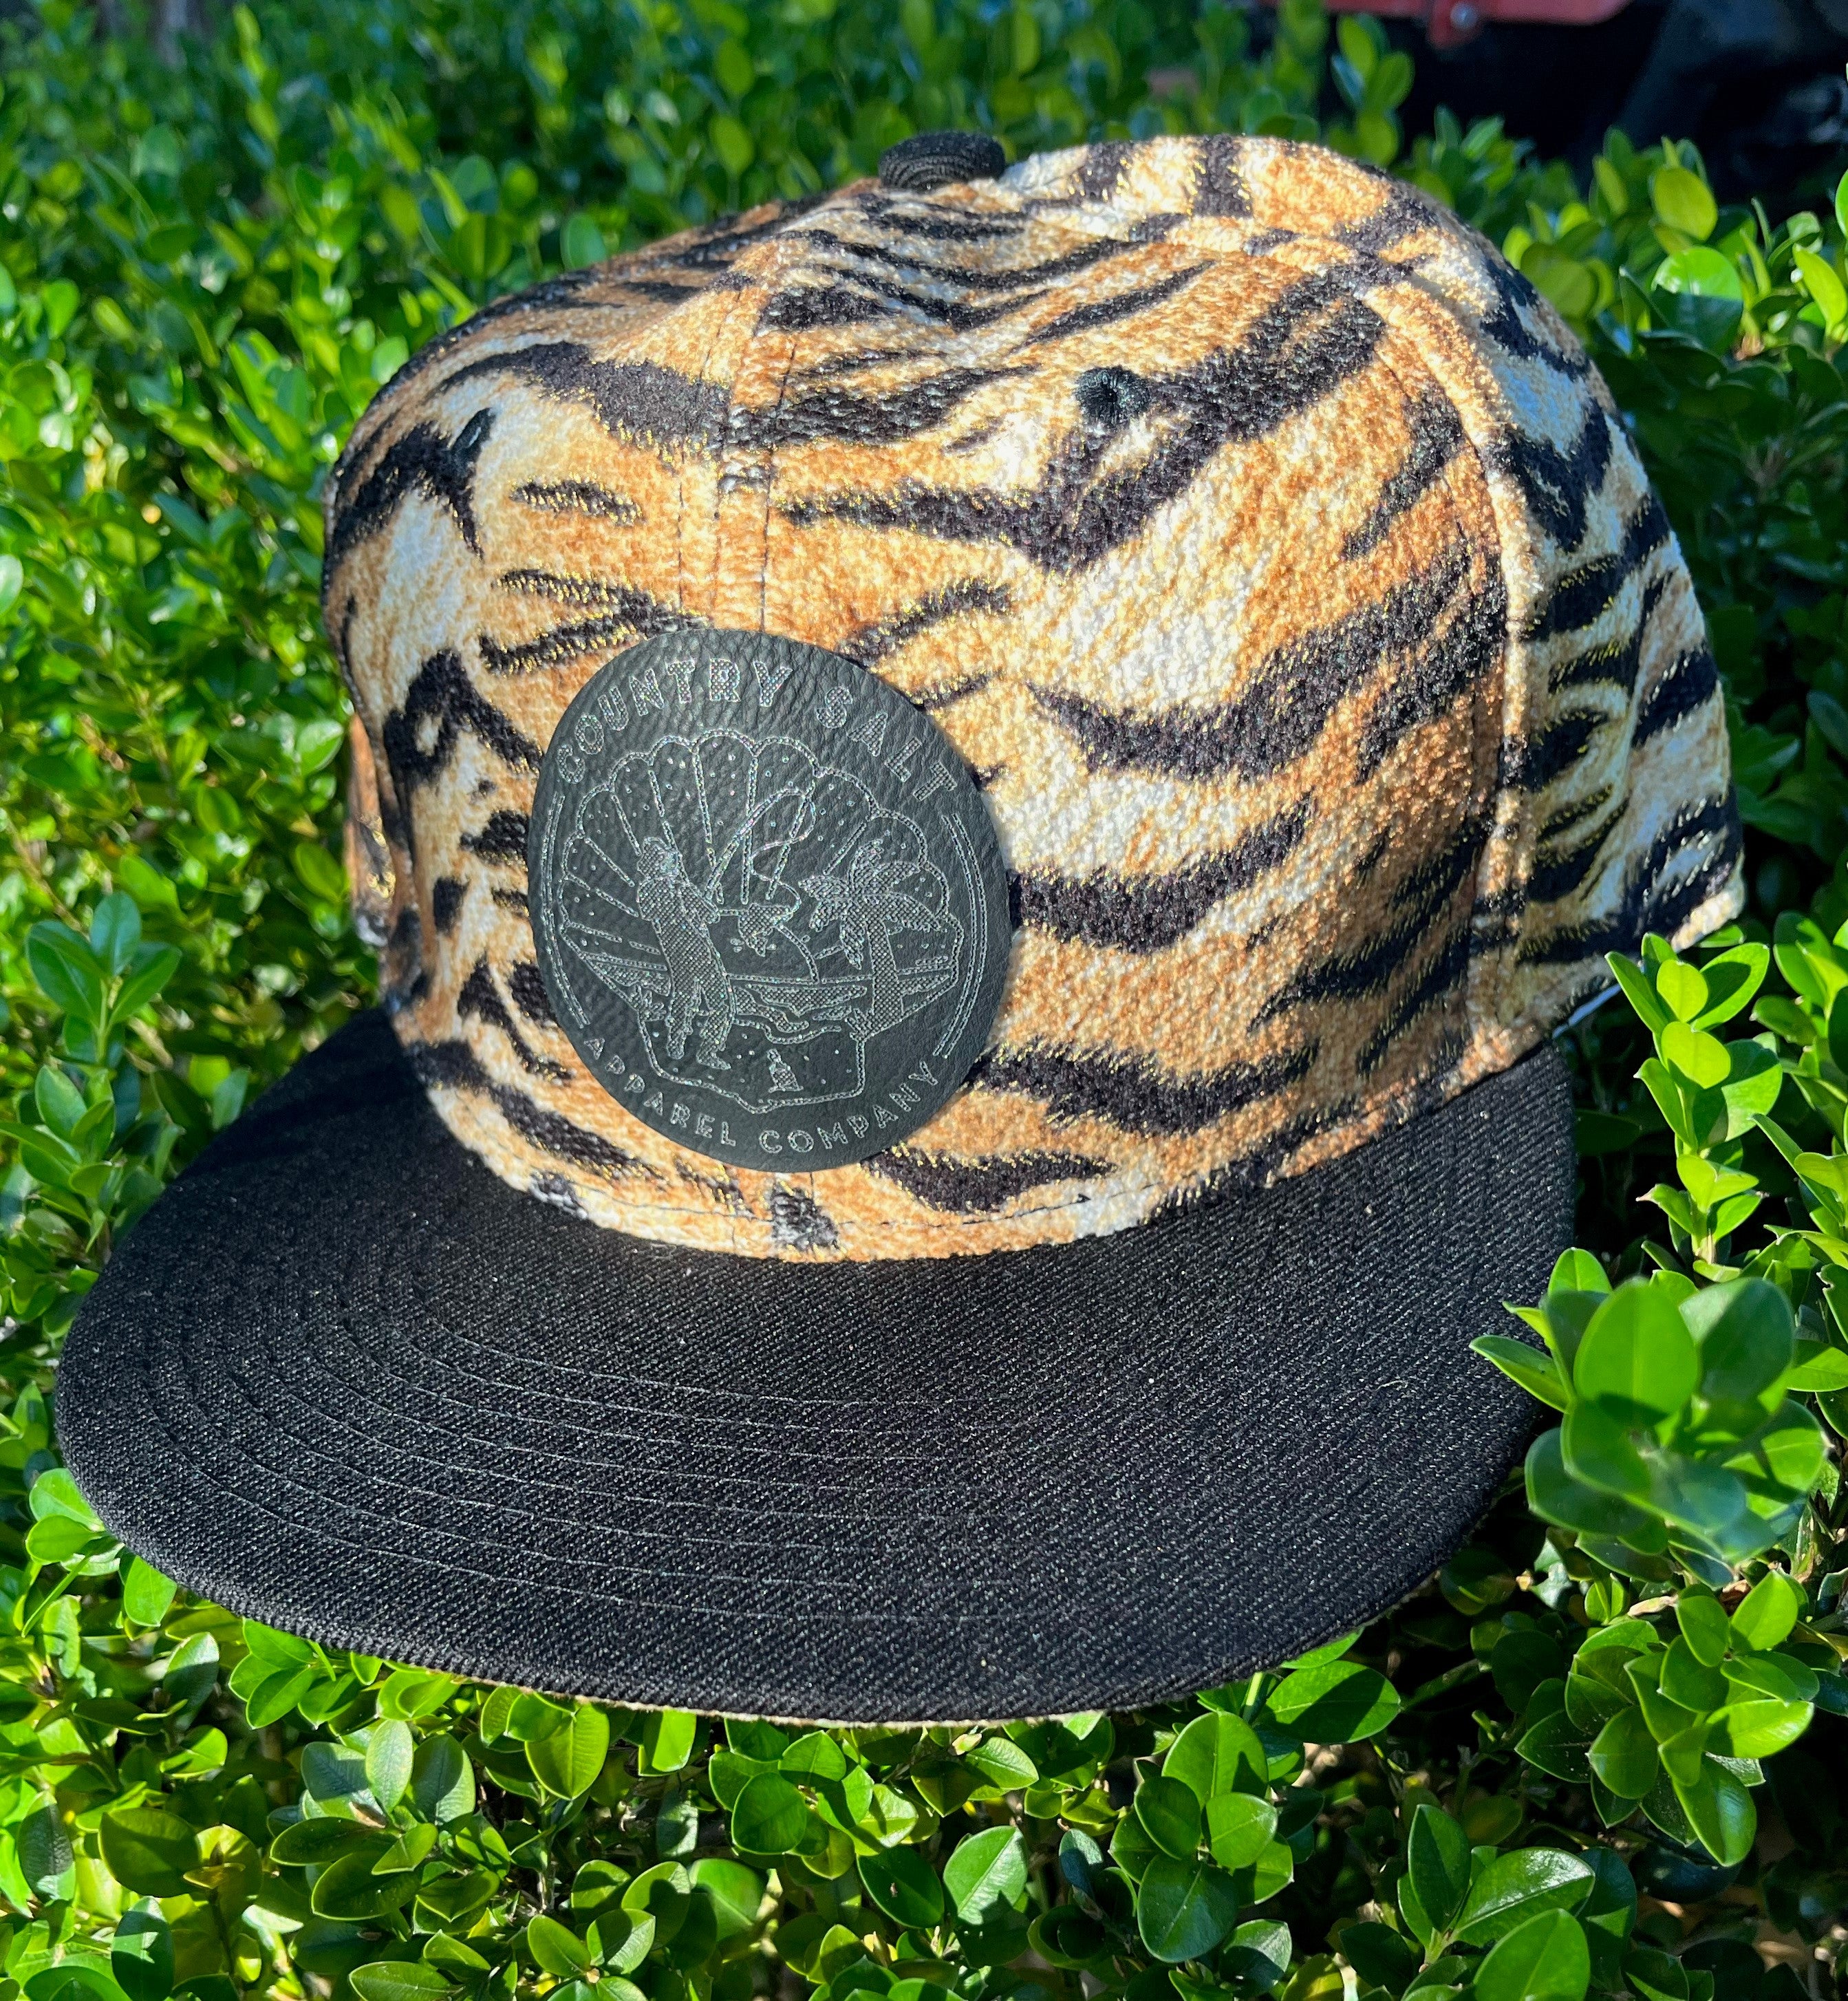 The "Tiger-Clow" Charity Hat